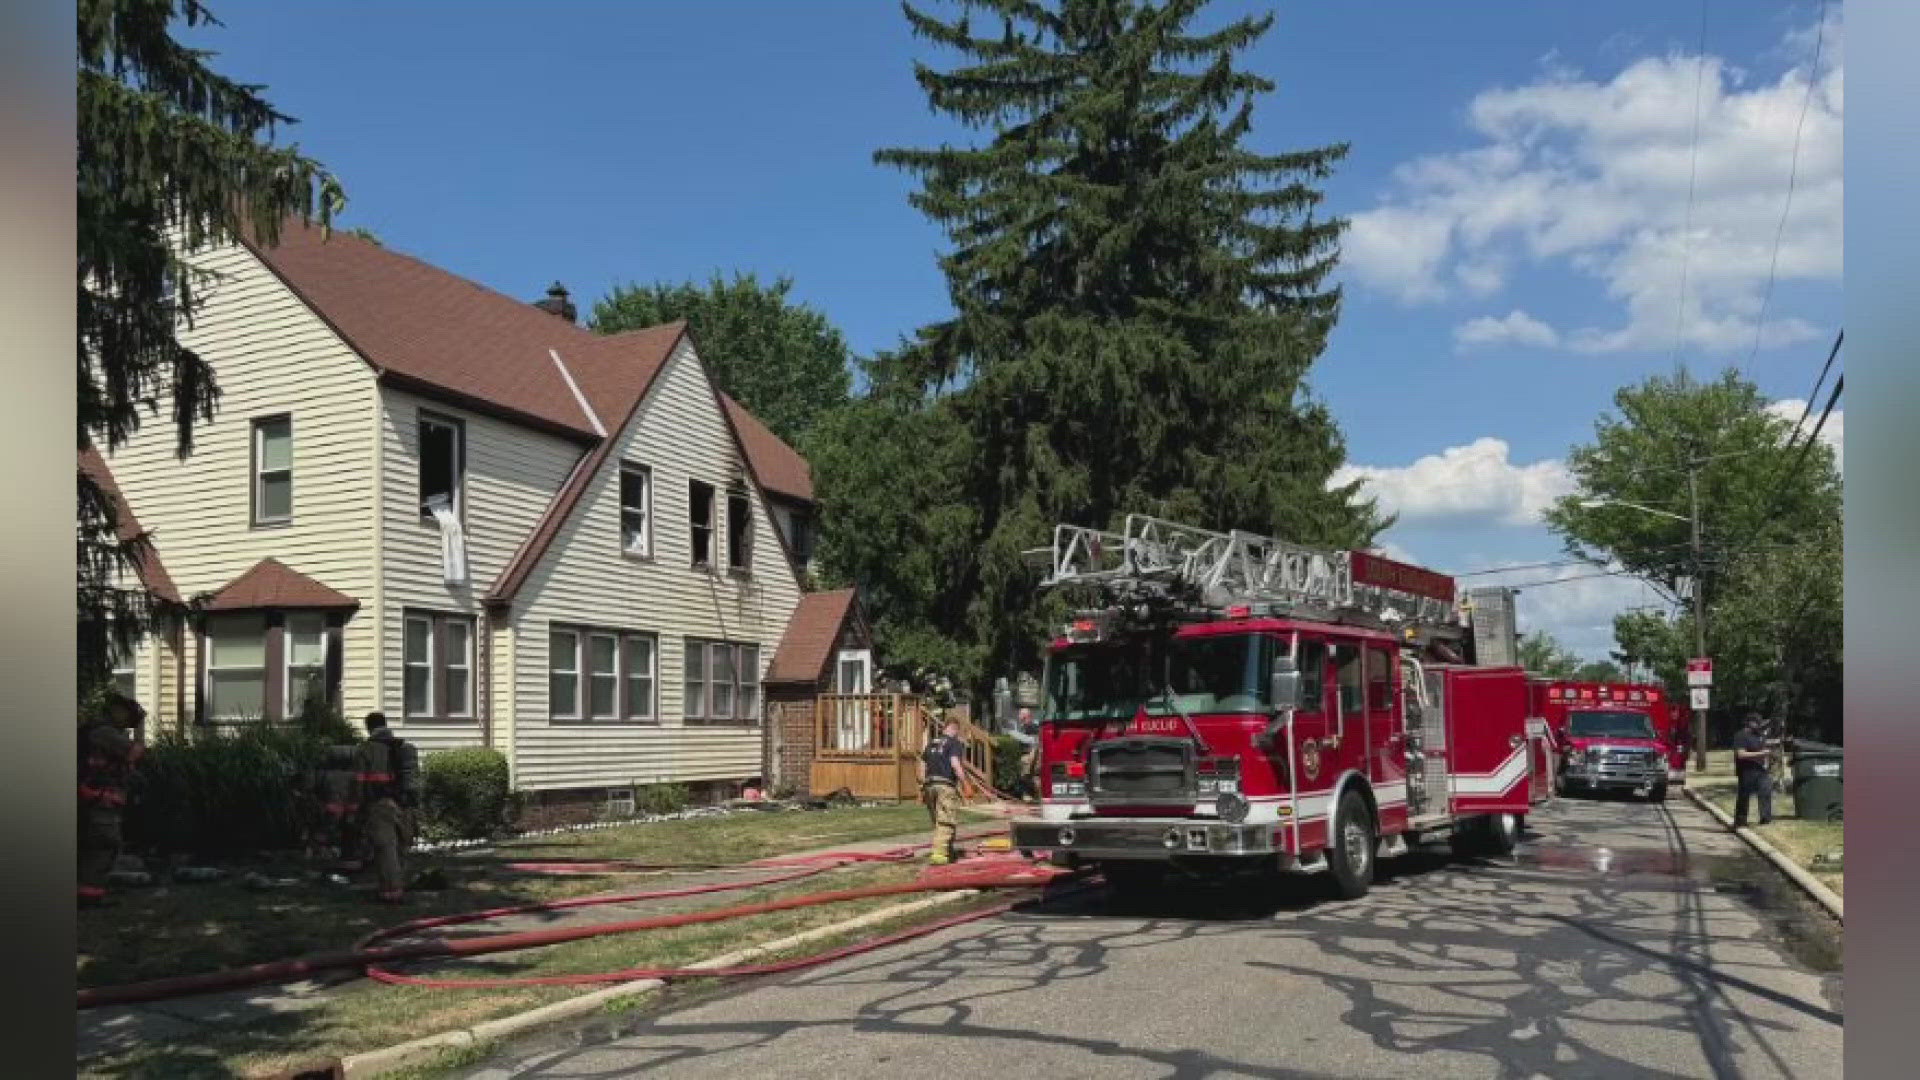 The fire happened on Monday at a duplex home on Ardmore Road.